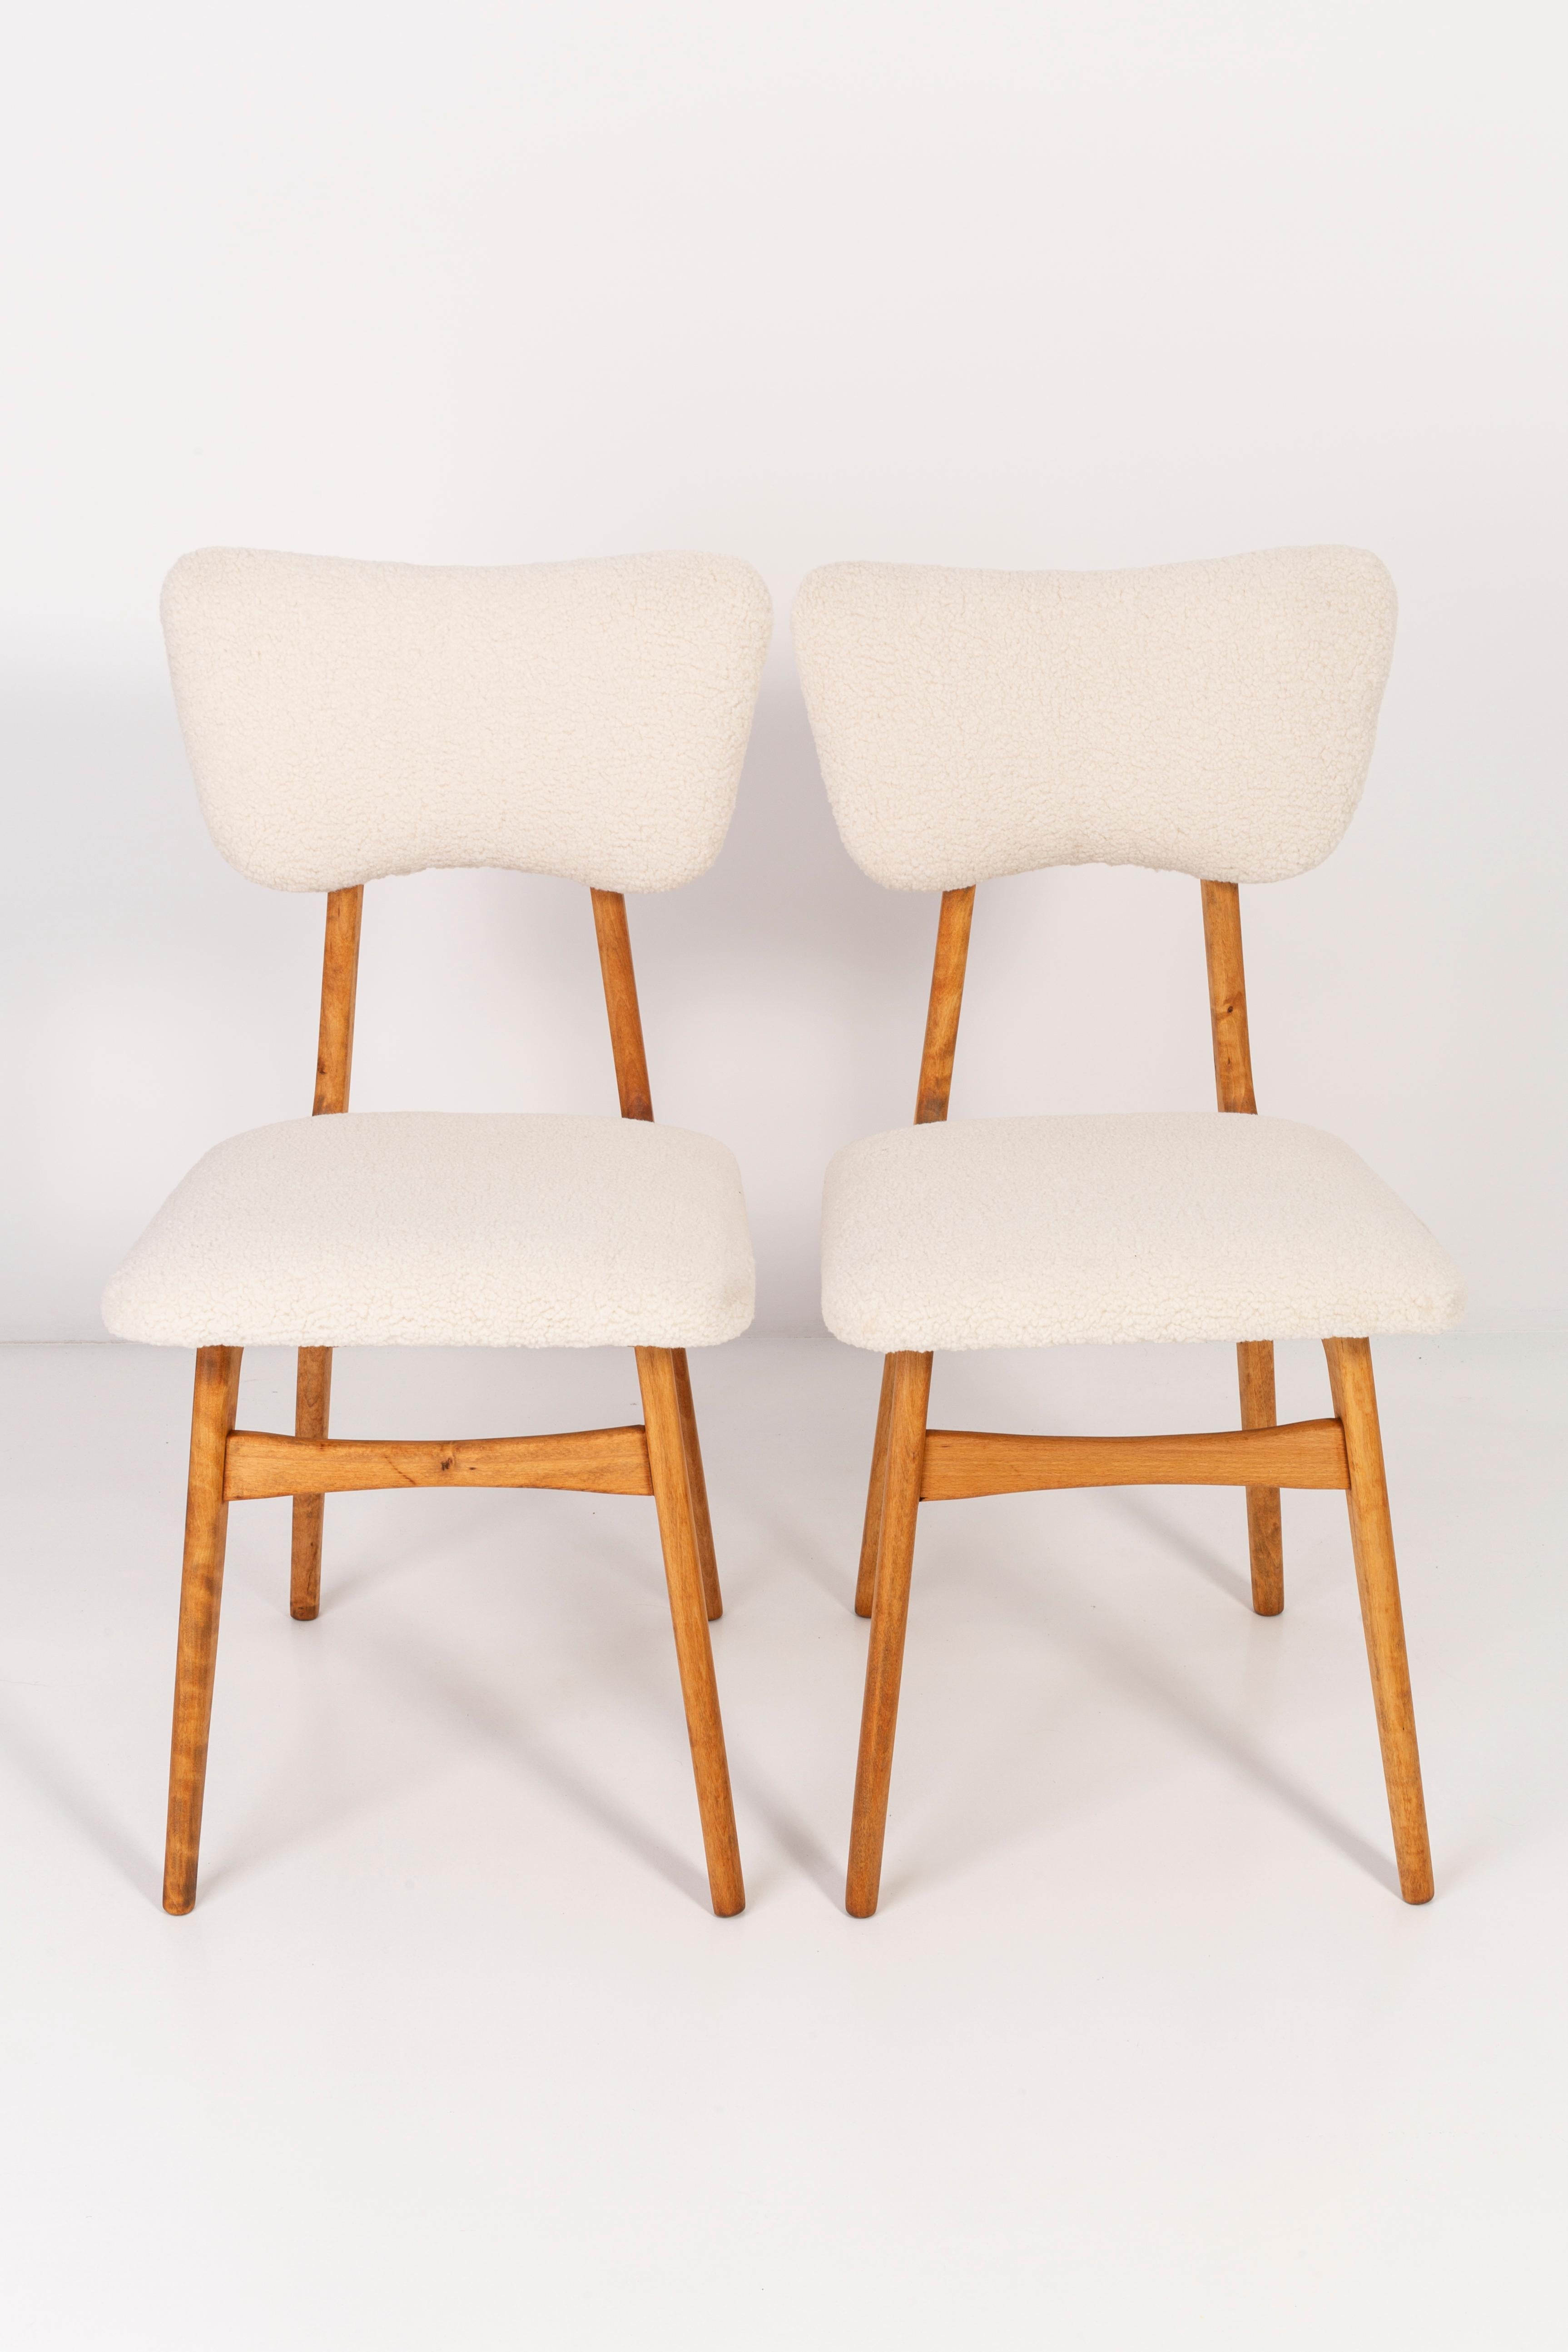 Set of Ten 20th Century Light Crème Boucle Chairs, 1960s For Sale 8